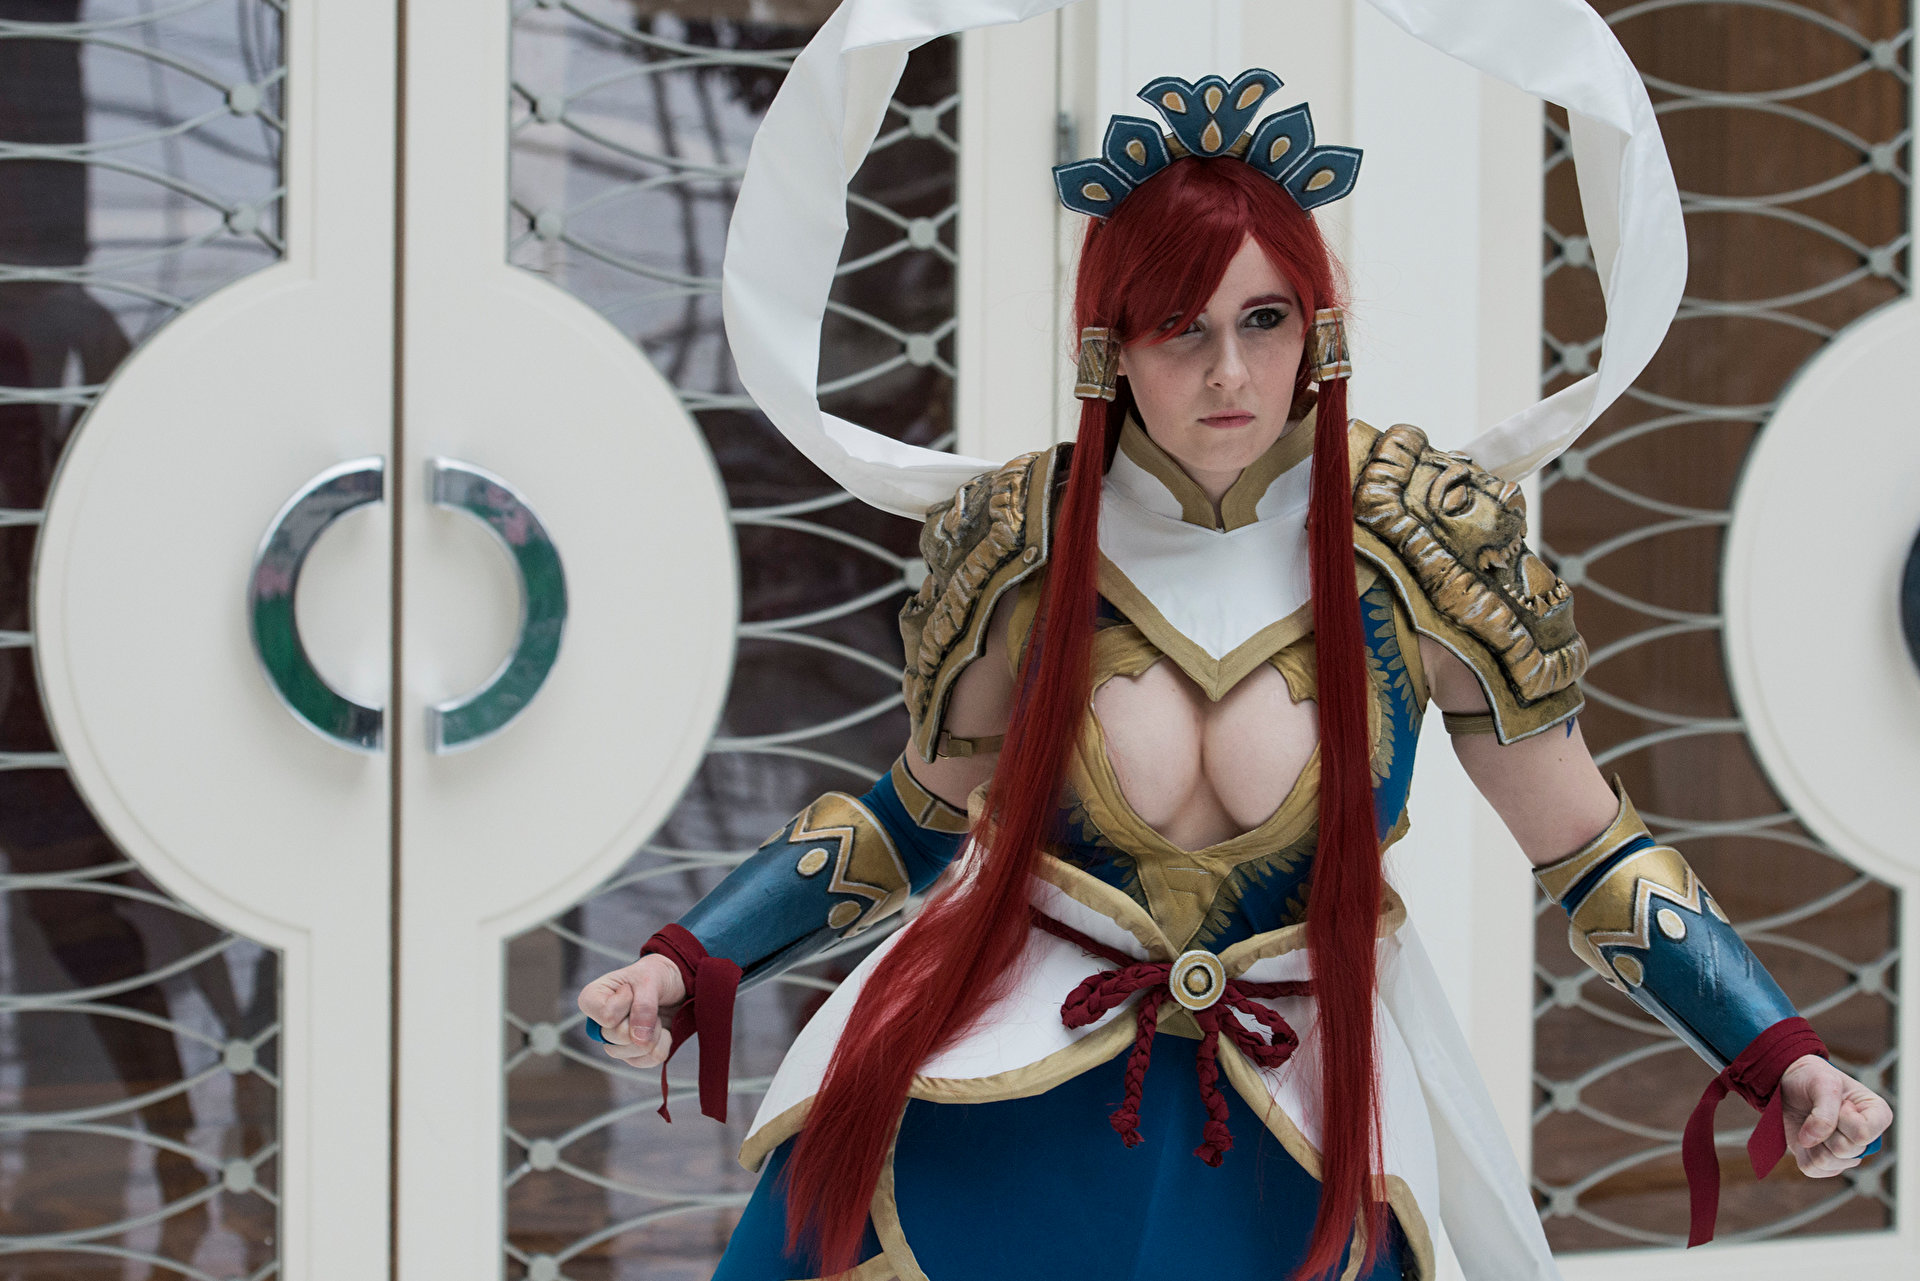 Cospix.net photo featuring Scarlet cosplay